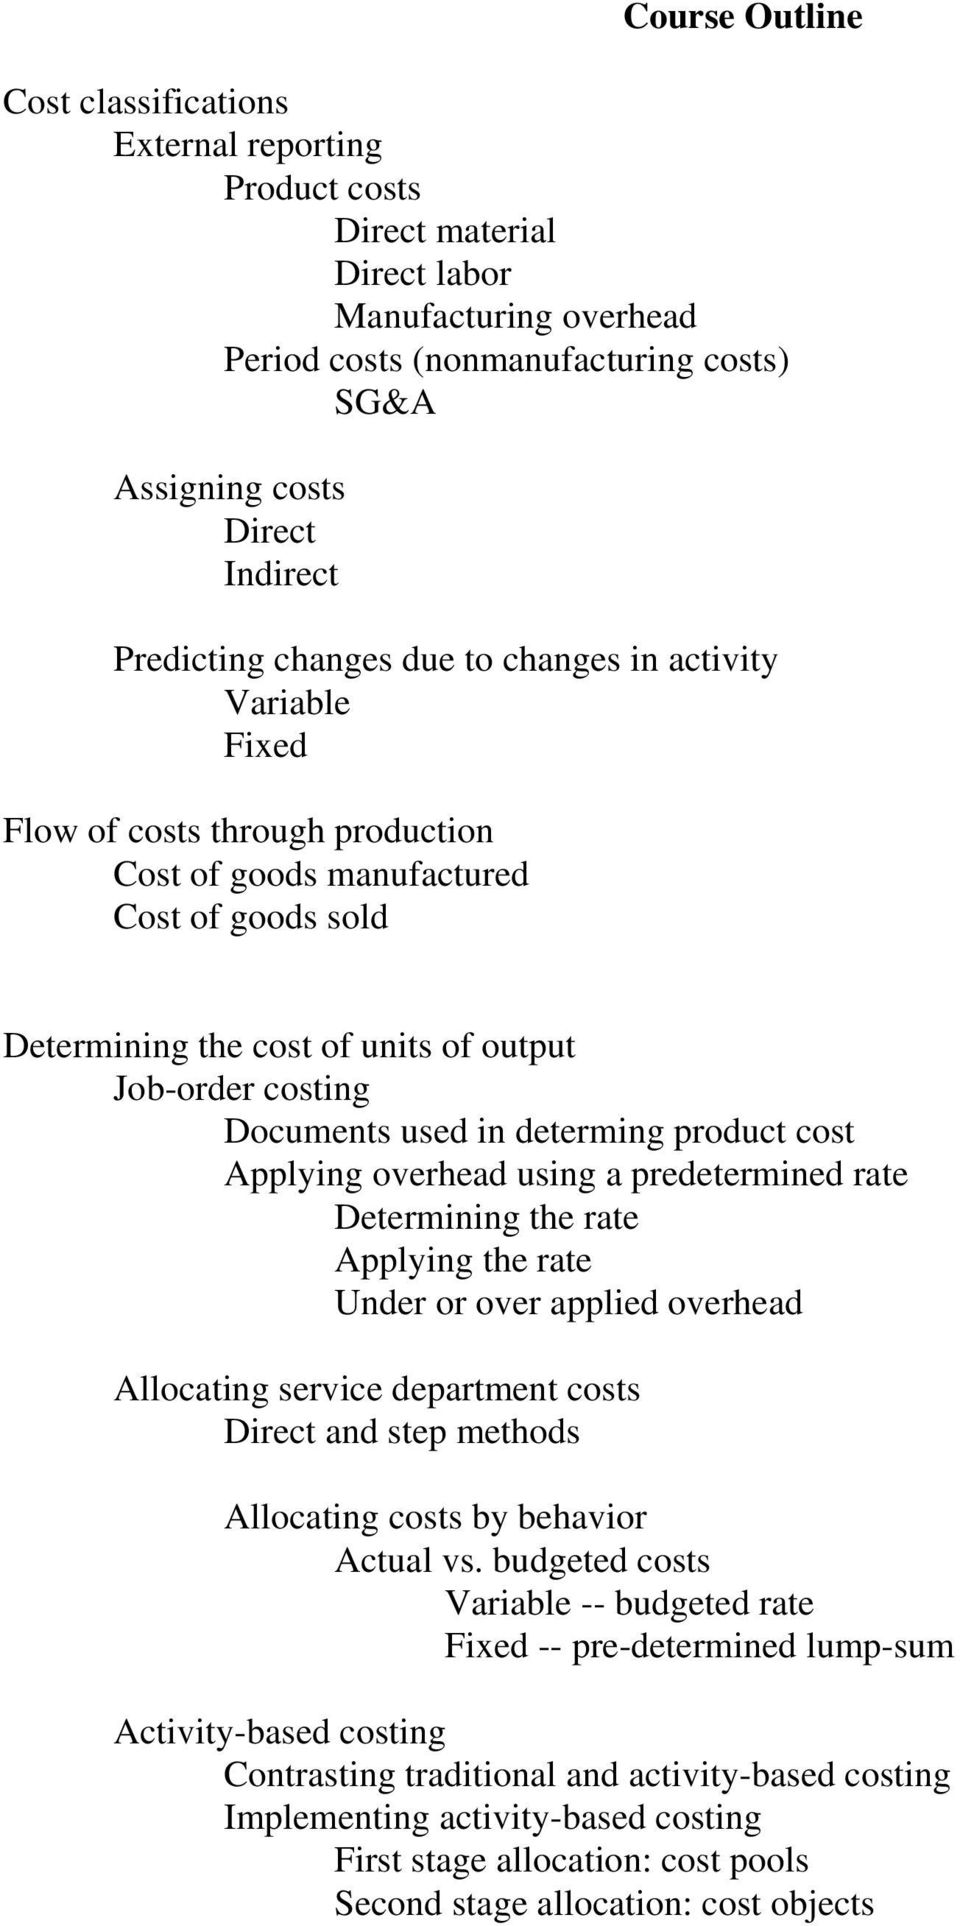 Documents used in determing product cost Applying overhead using a predetermined rate Determining the rate Applying the rate Under or over applied overhead Allocating service department costs Direct